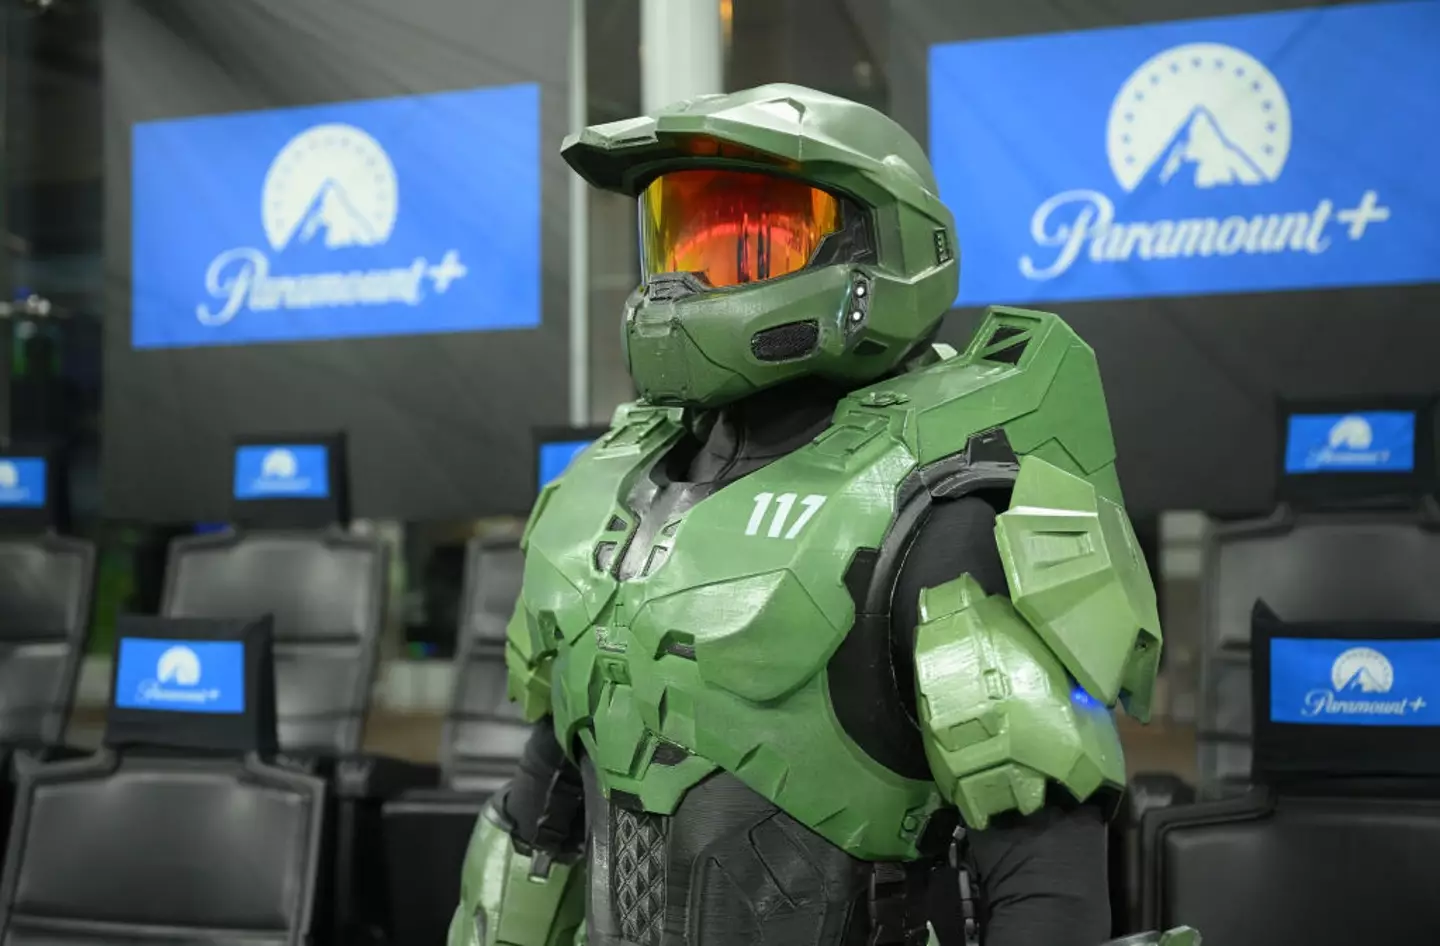 A person dressed up as Master Chief from the Halo franchise.